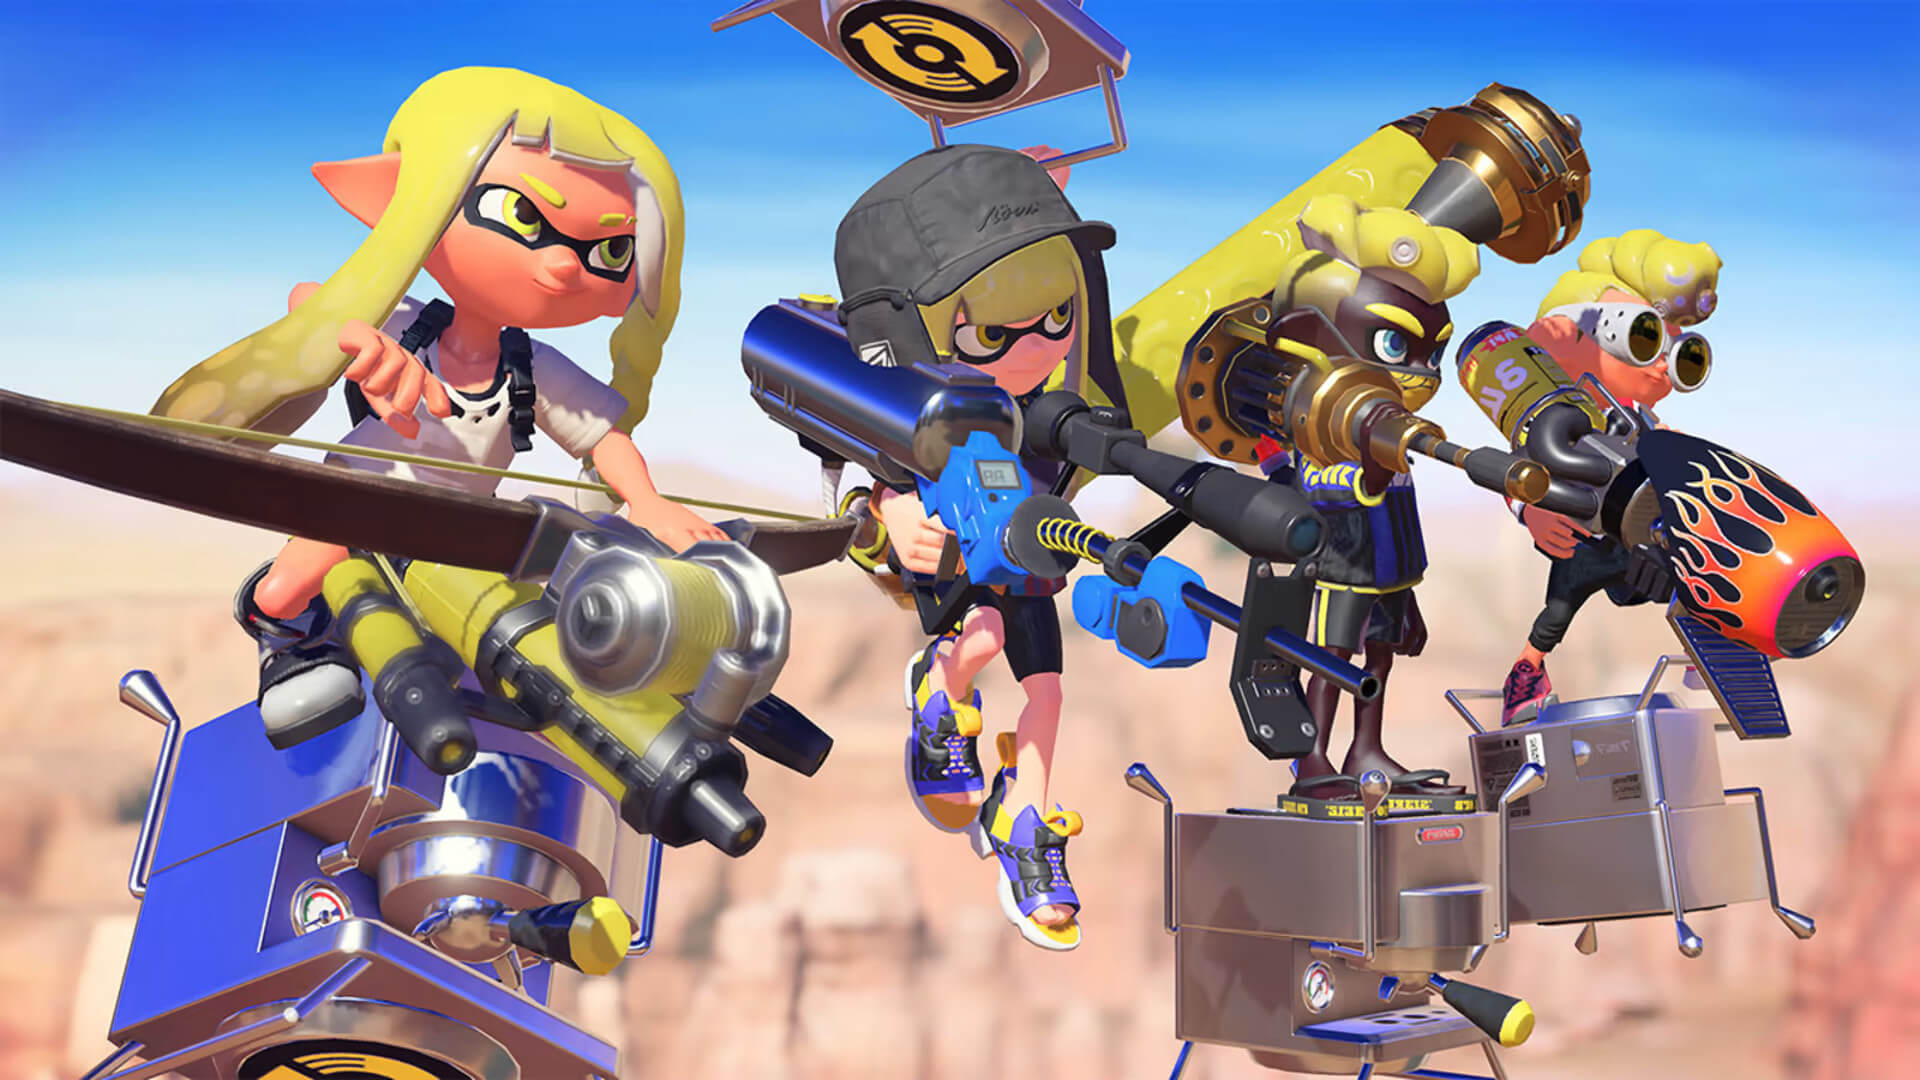 Four Inklings getting ready to fight in Splatoon 3, one of the games that will be at Nintendo Live 2023